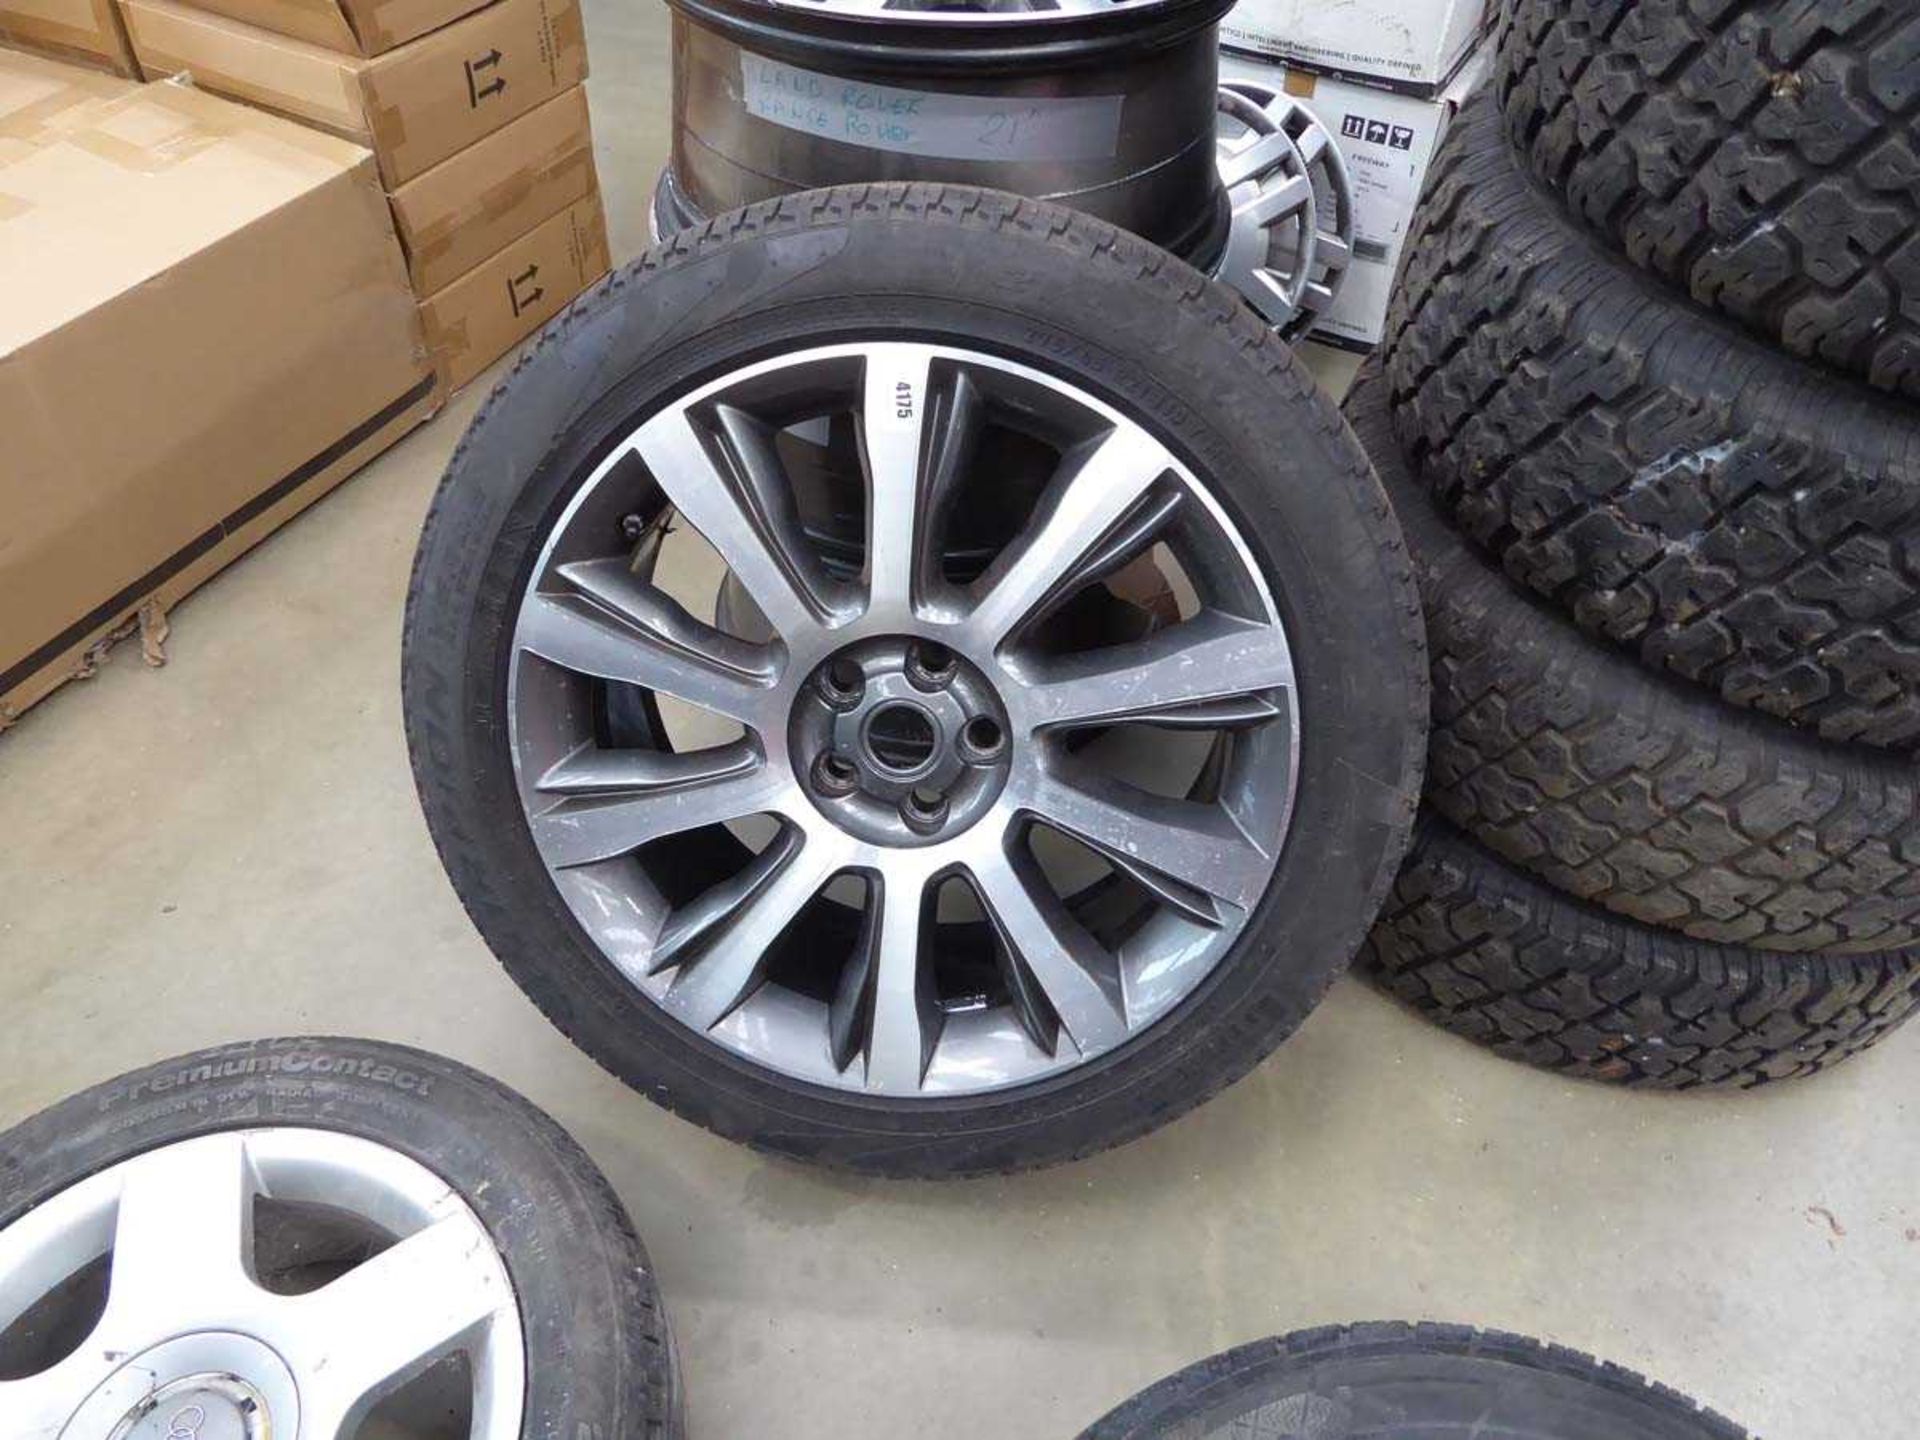 4 21" Land Rover alloy wheels and 1 tyre